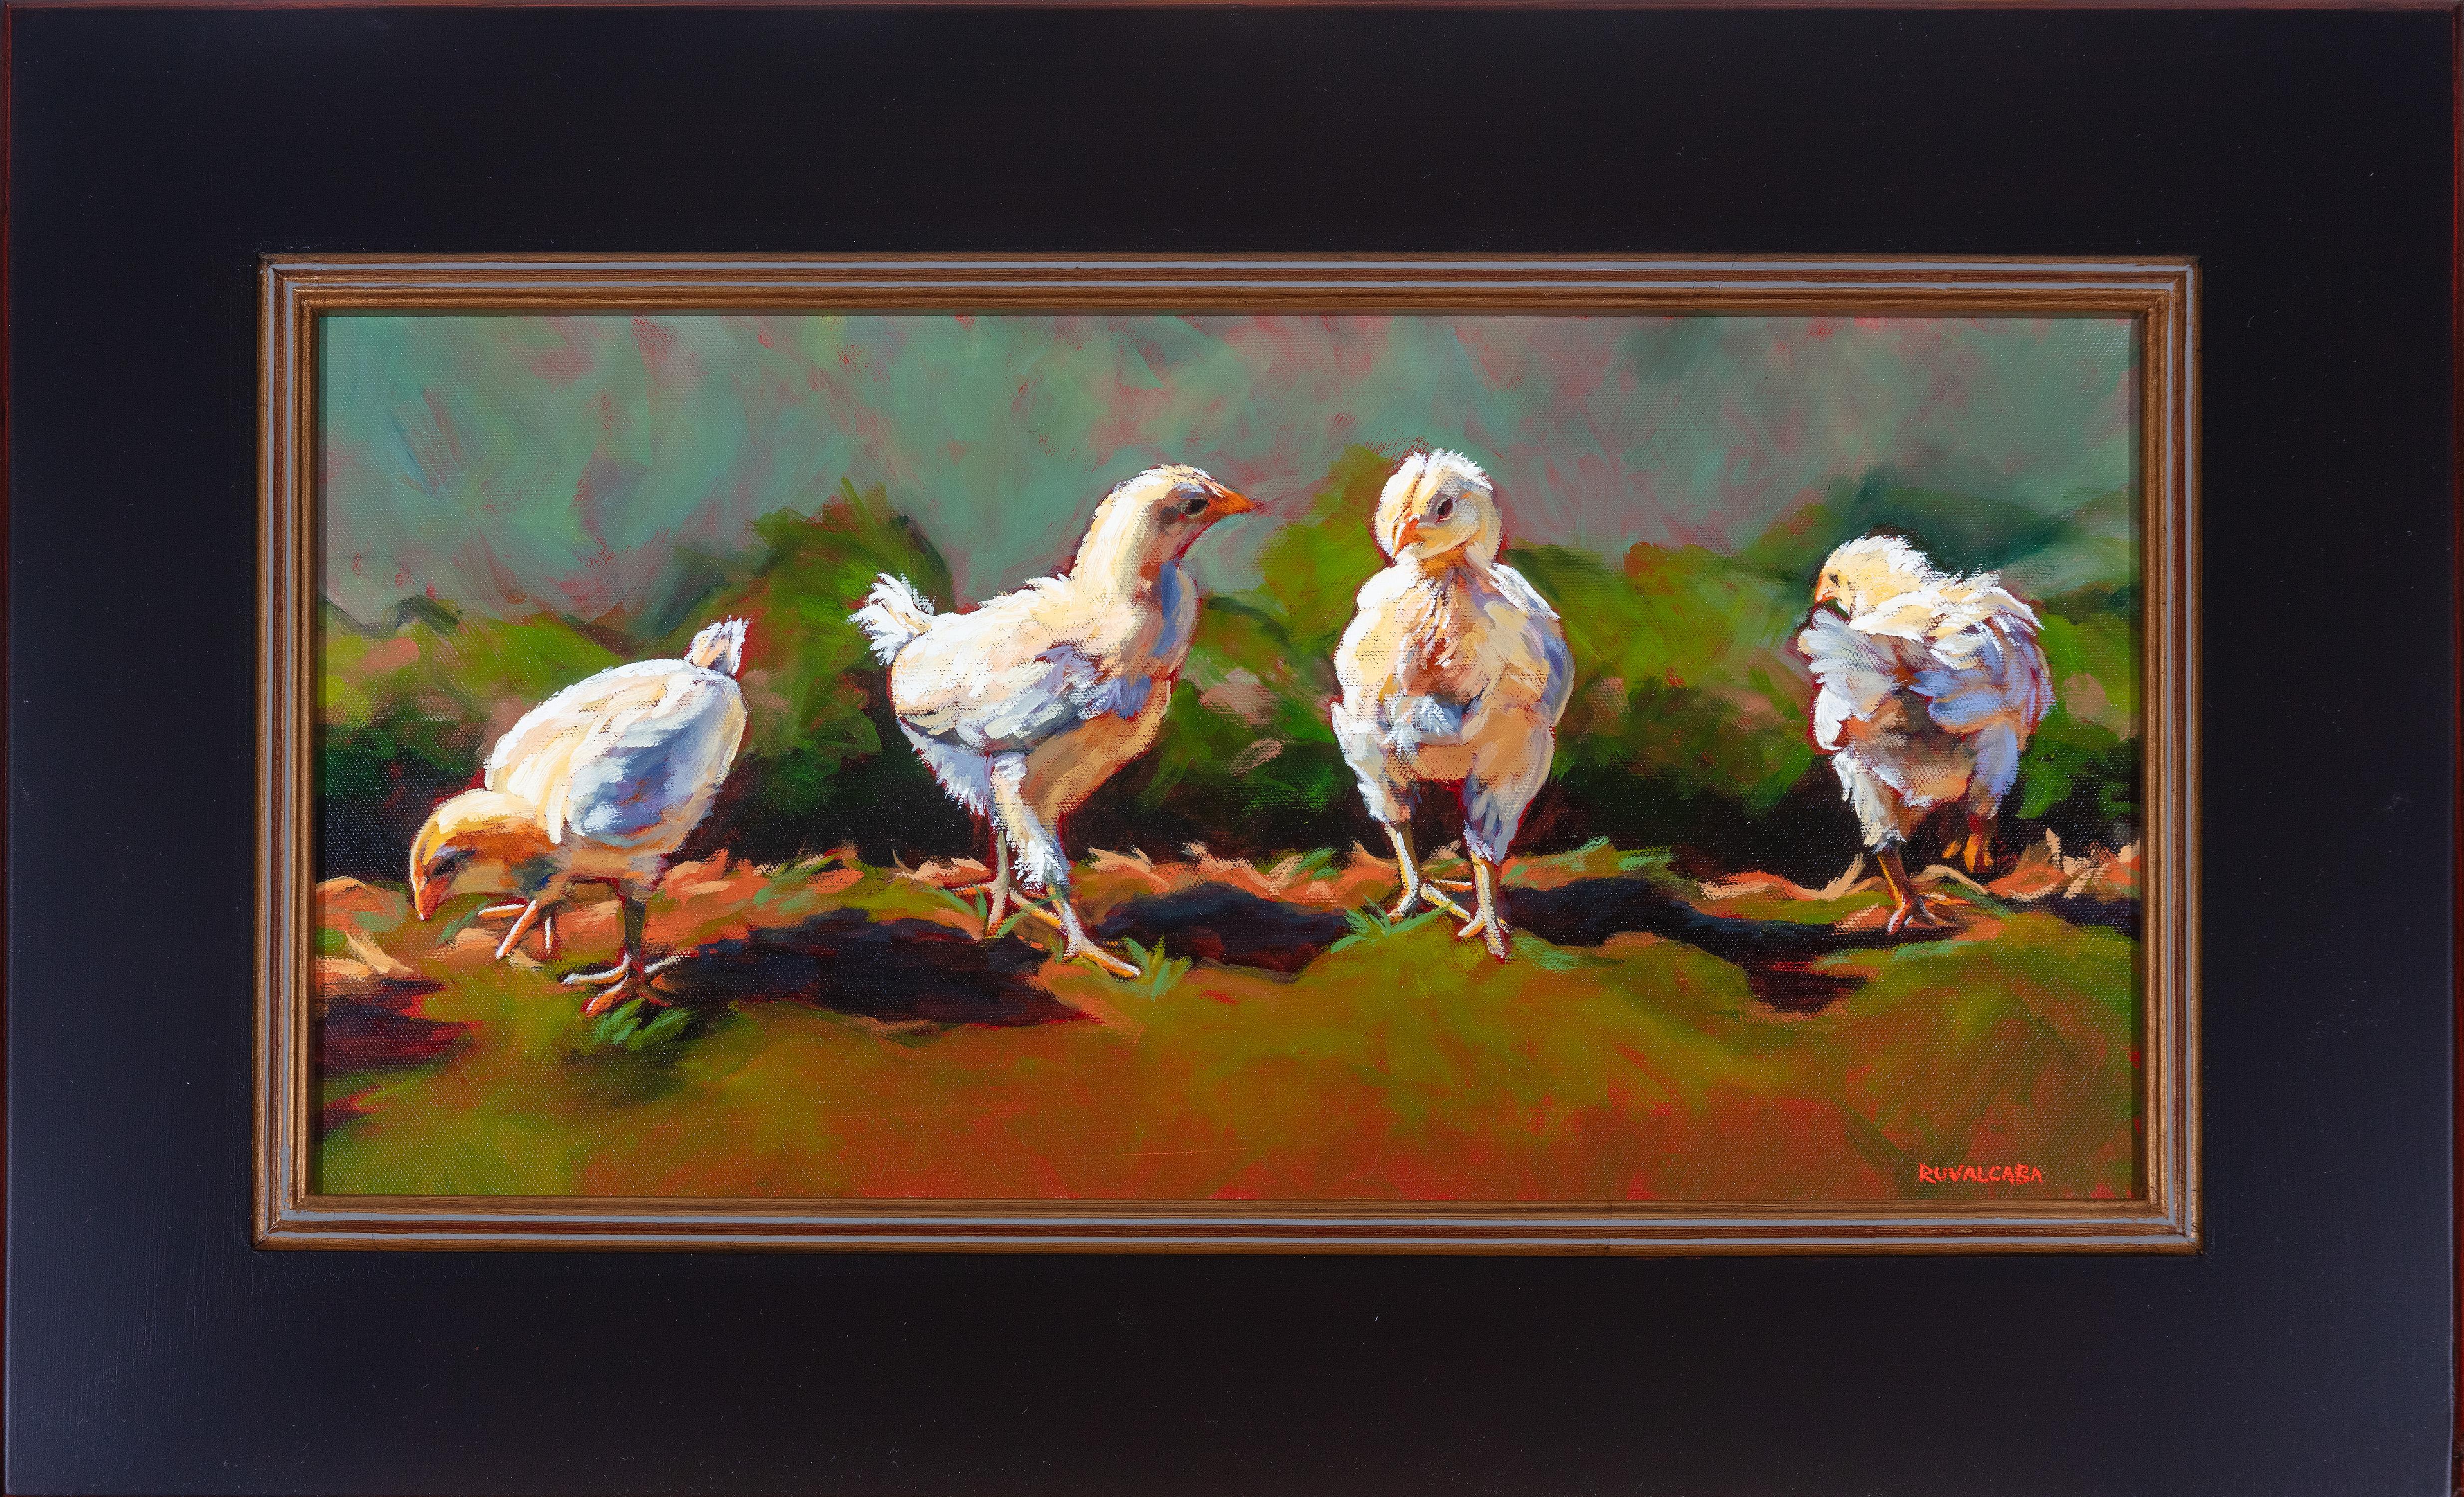 Cathryn Ruvalcaba Animal Painting - "Chick Chat" realism high realism oil animals signed by Cathryn  Ruvalcaba